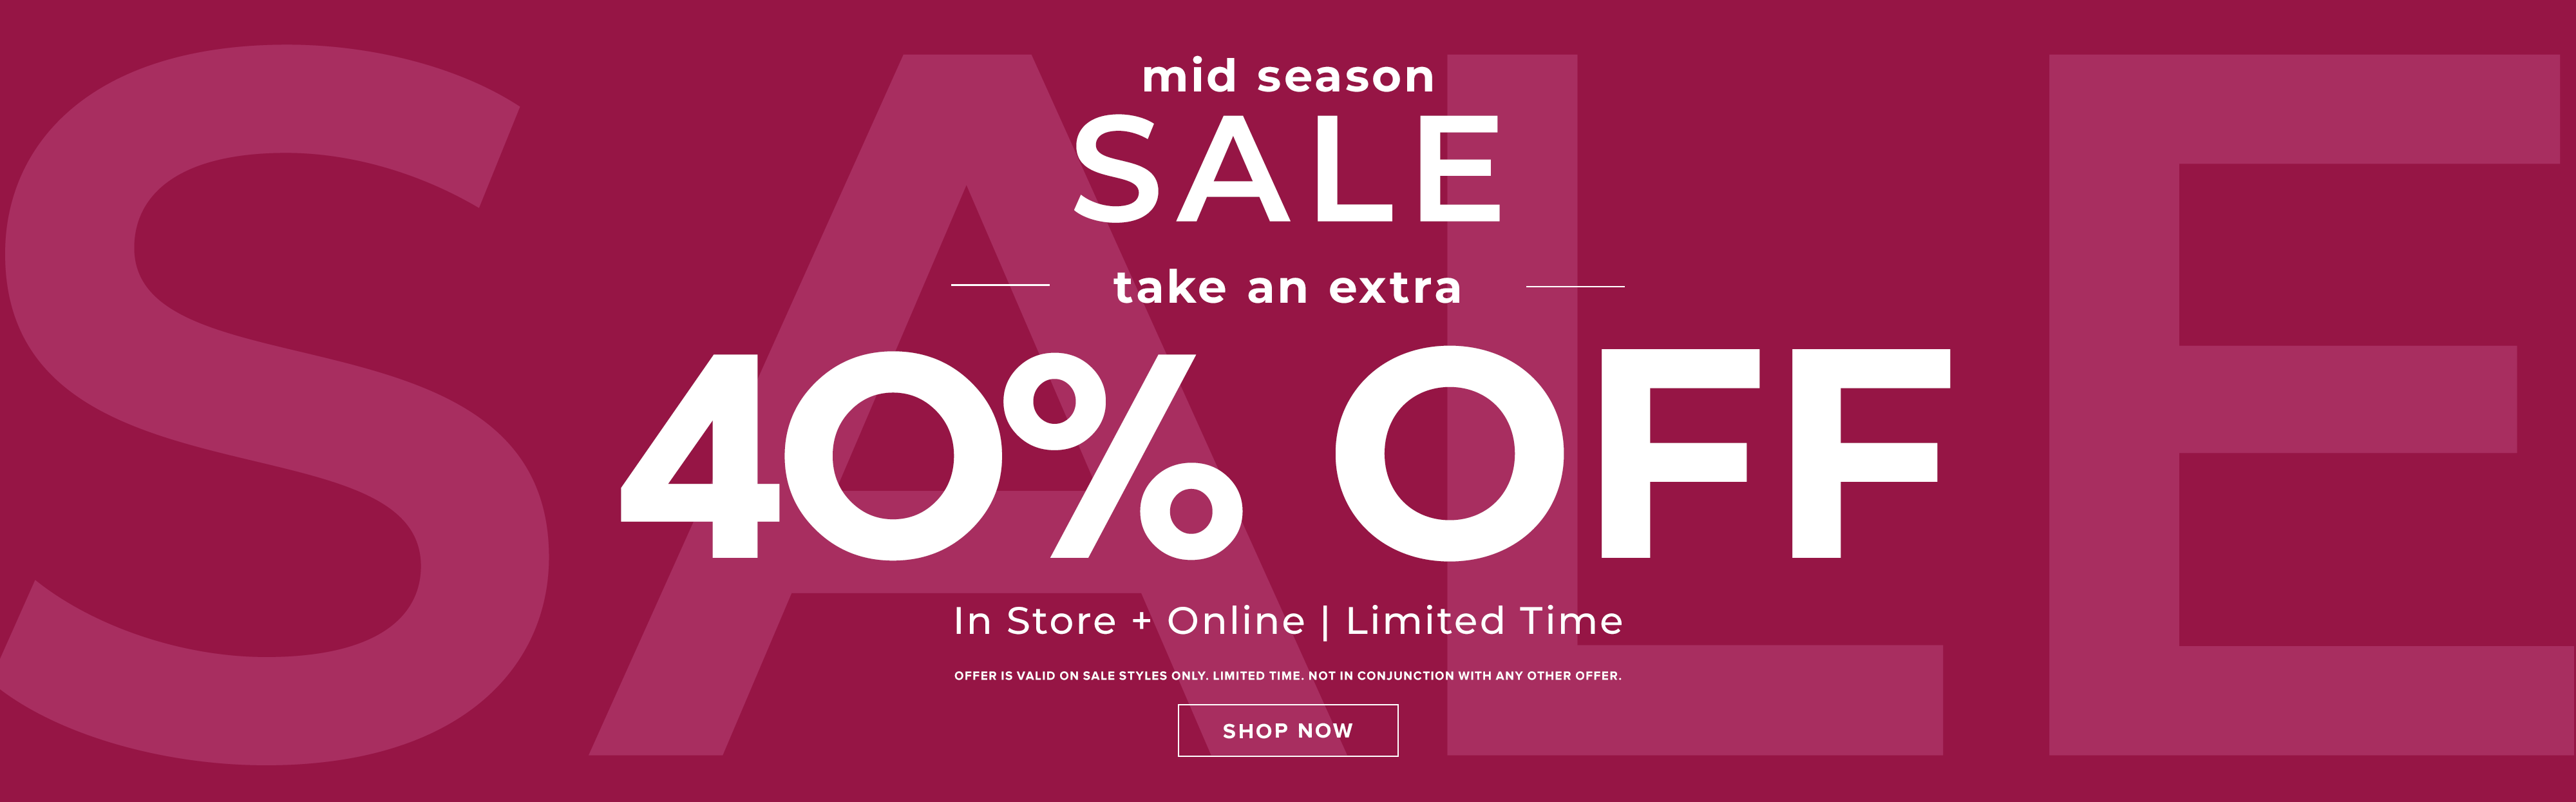 Nine West Take an extra 40% OFF on already reduced sale + outlet styles from shoes & handbags